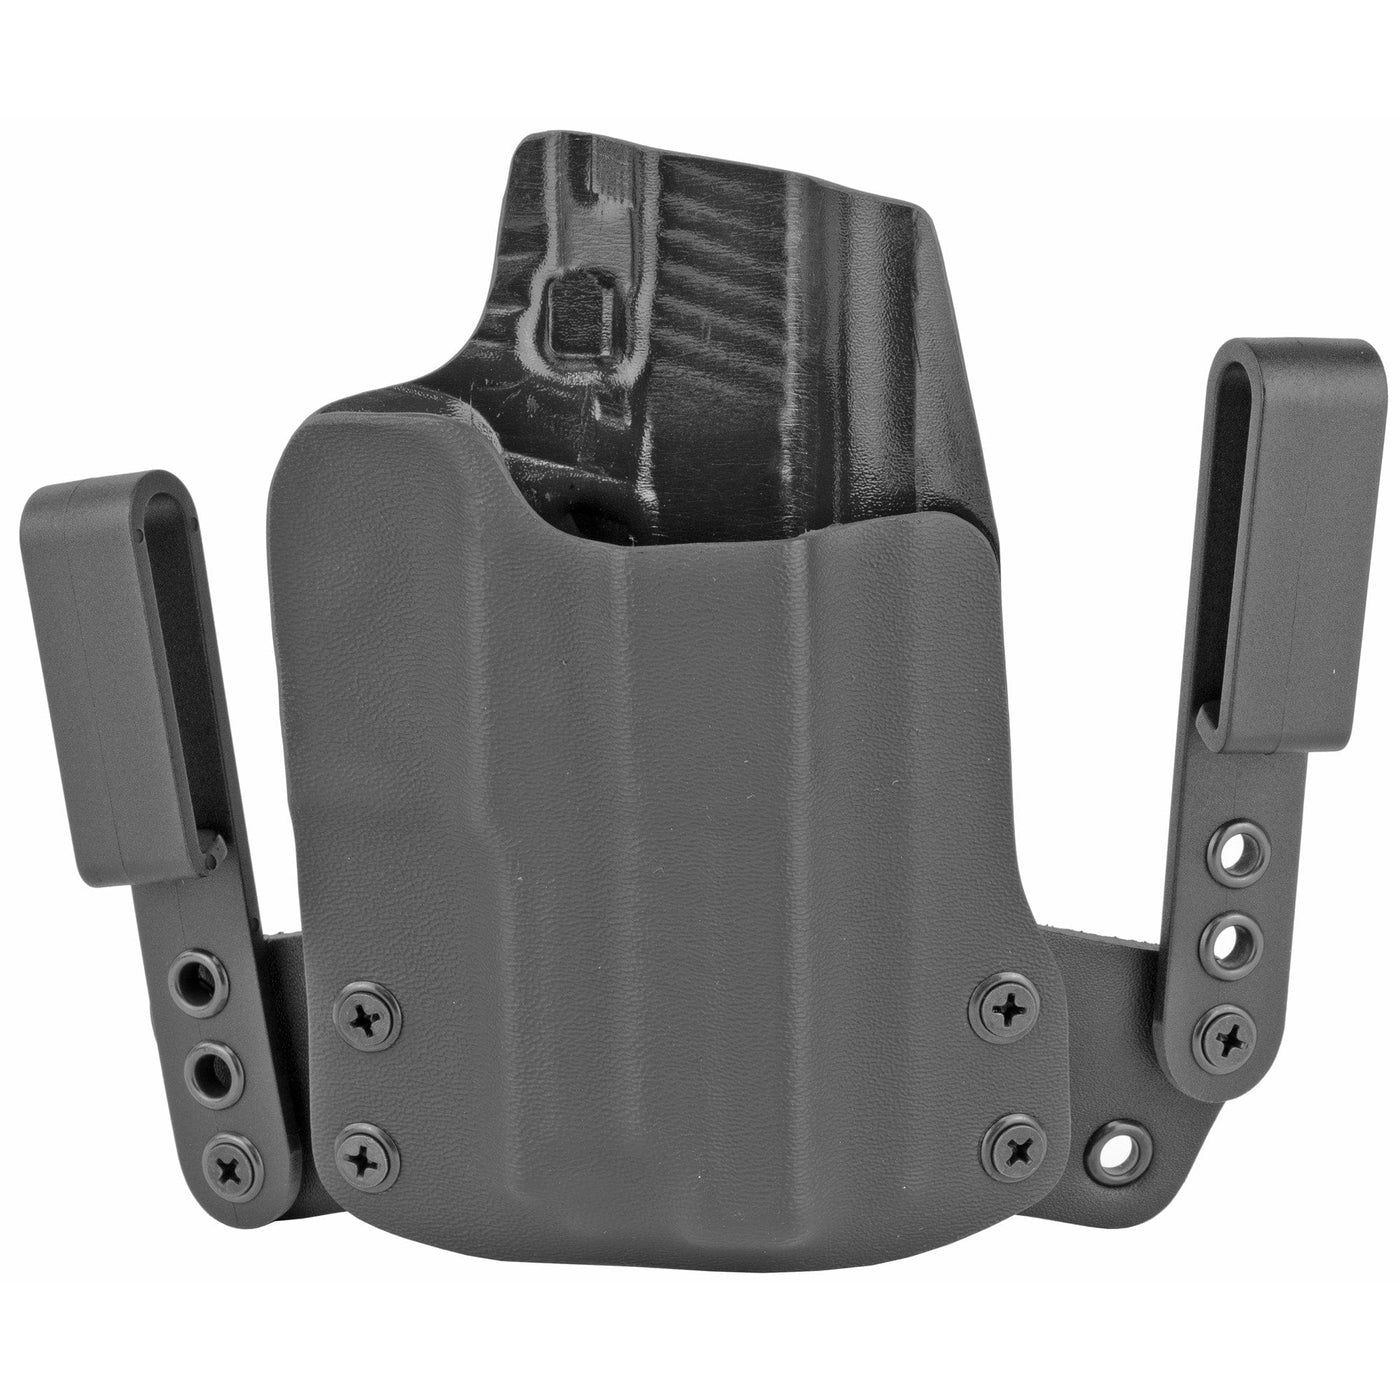 BlackPoint Tactical Blk Pnt Mini Wing Sig P229 Rh Blk Holsters